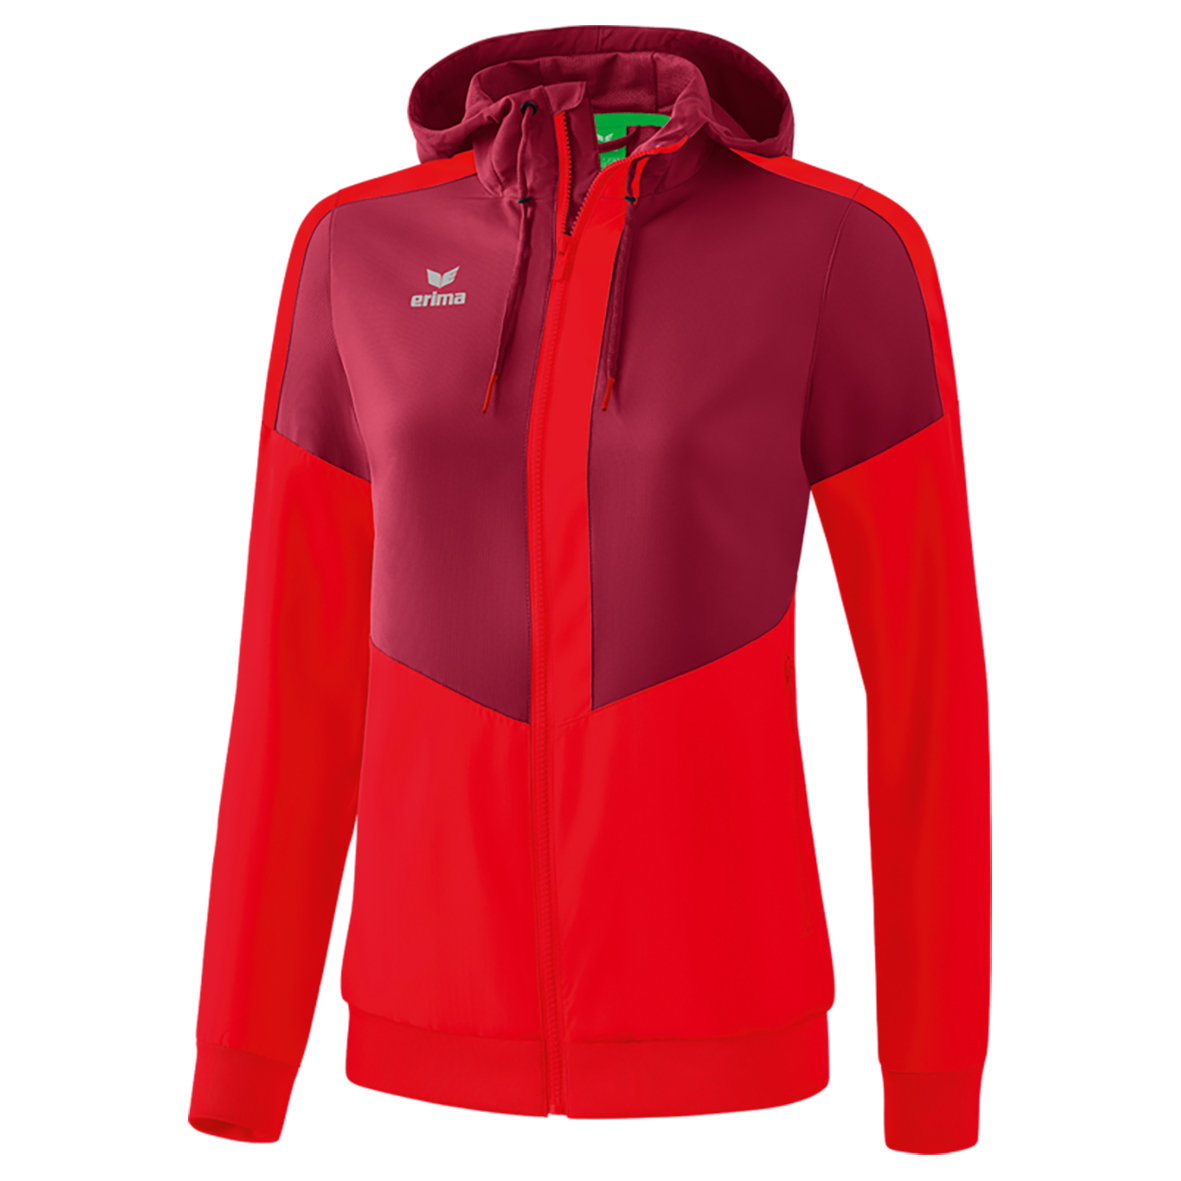 ERIMA SQUAD TRACK TOP JACKET WITH HOOD, BORDEAUX-RED WOMEN.